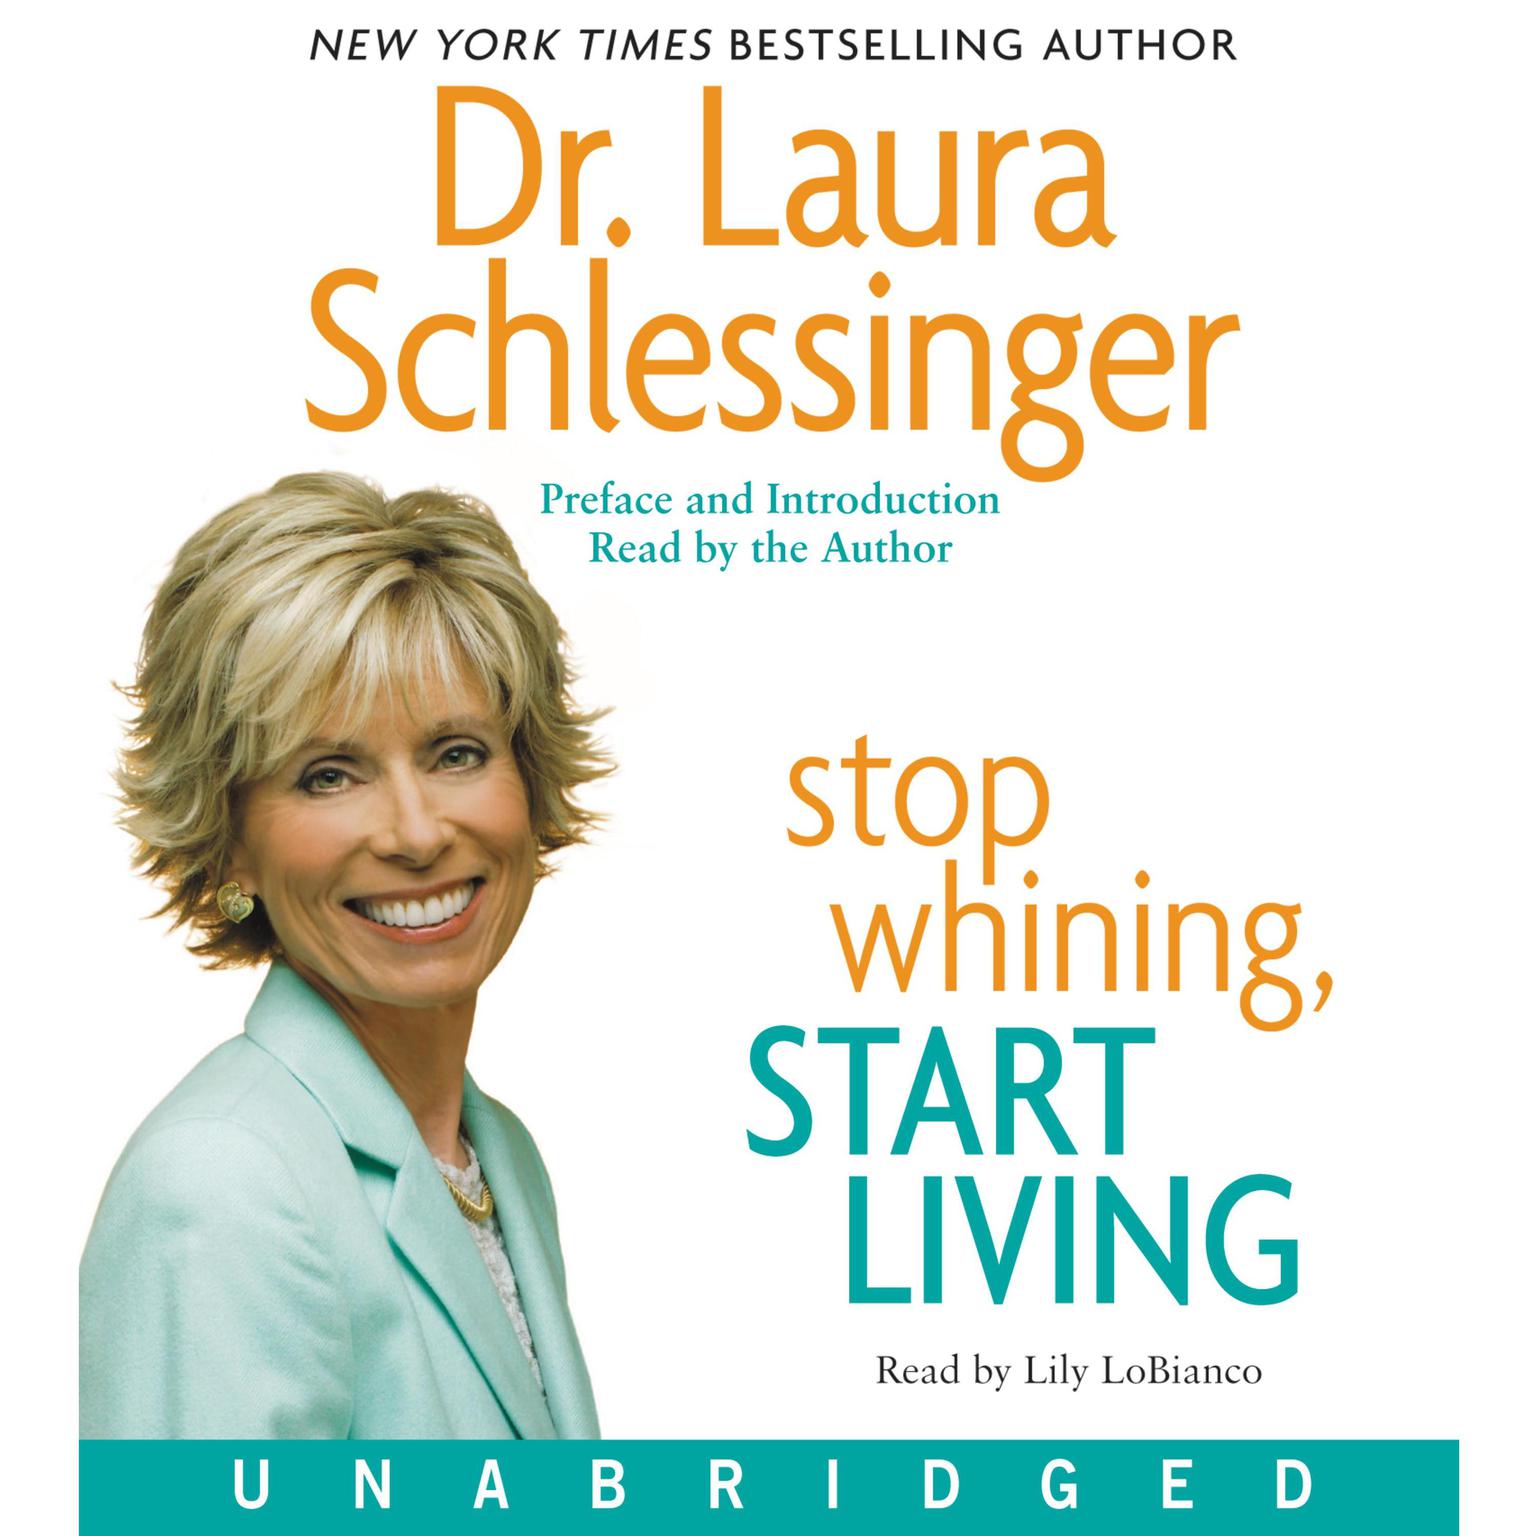 Stop Whining, Start Living: Turning Hurt Into Happiness Audiobook, by Laura Schlessinger